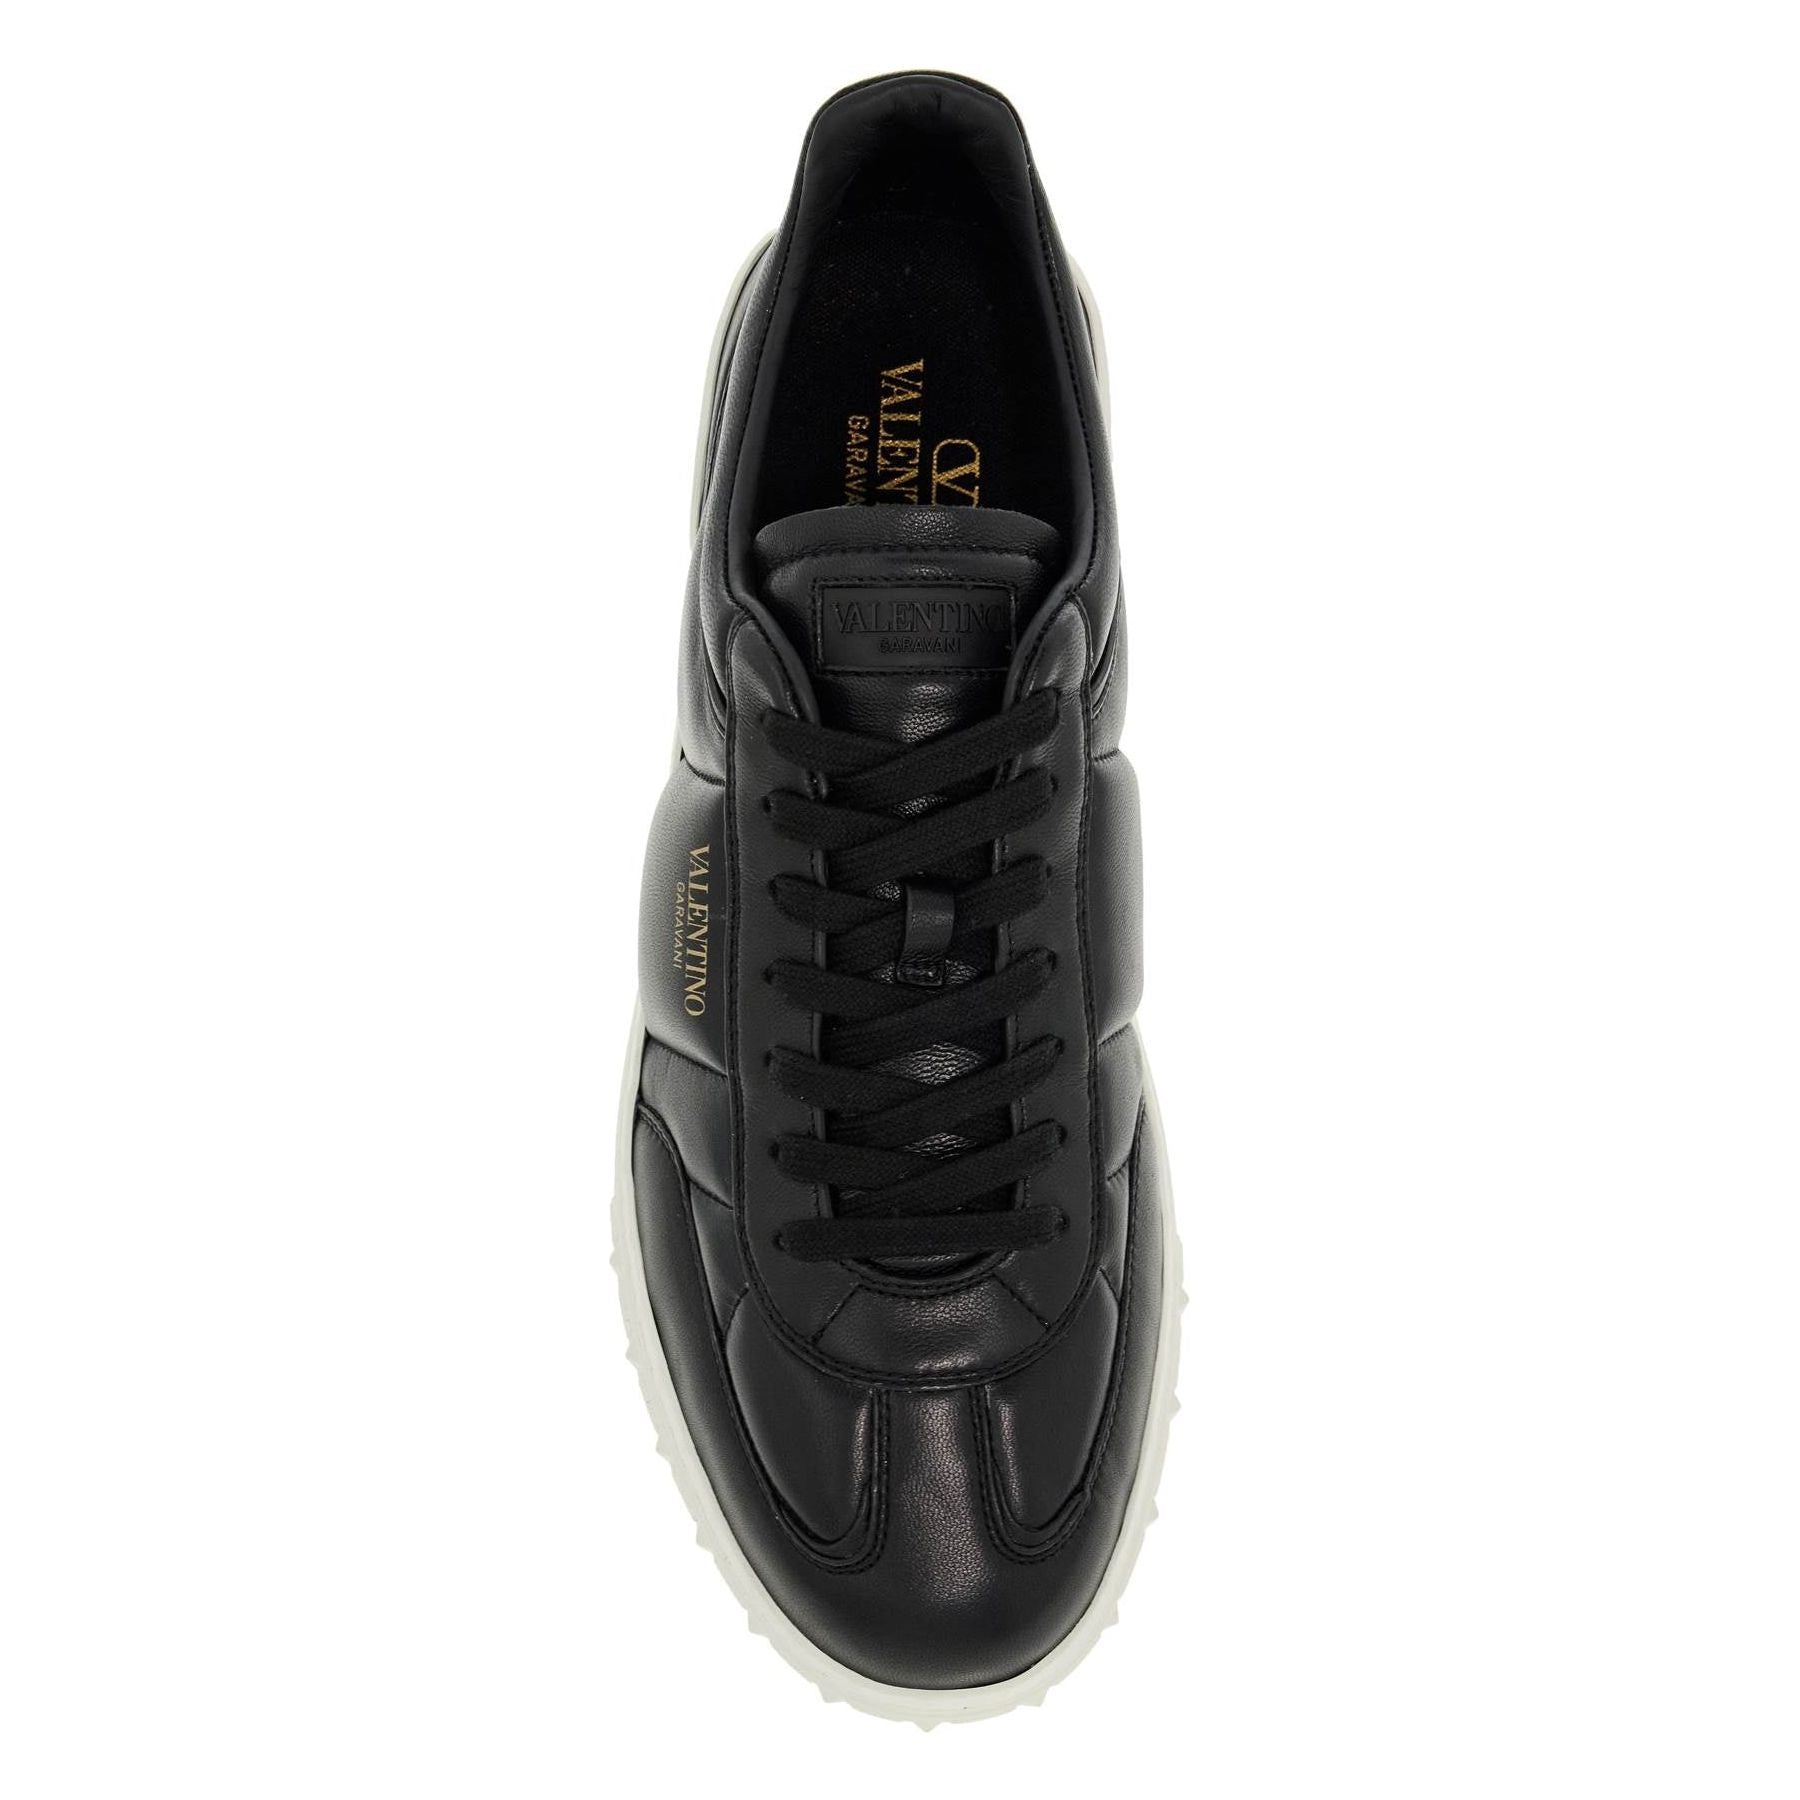 Upvillage Nappa Leather Low Top Sneakers